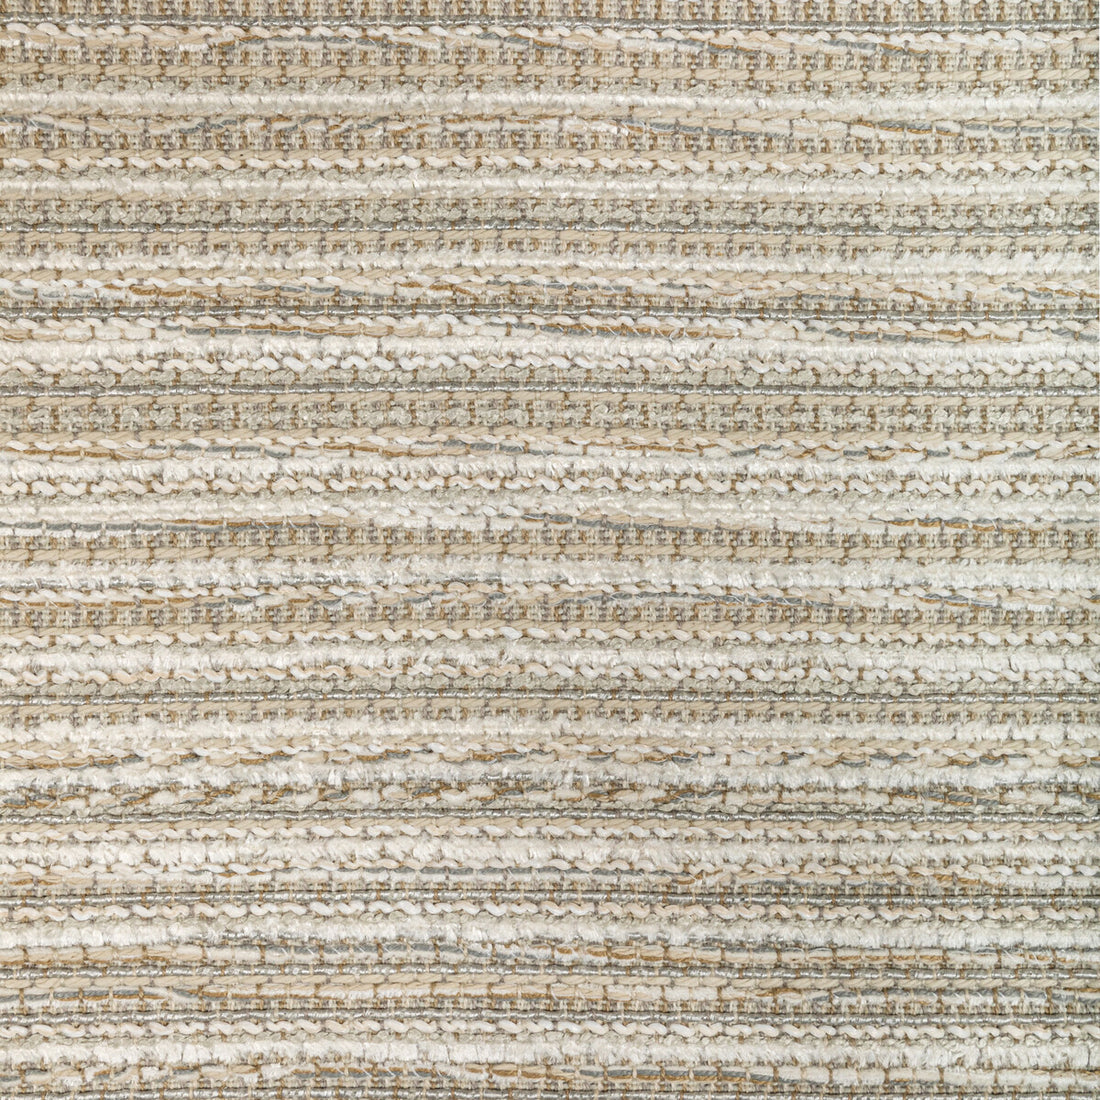 Kravet Design fabric in 36416-1611 color - pattern 36416.1611.0 - by Kravet Design in the Performance Crypton Home collection